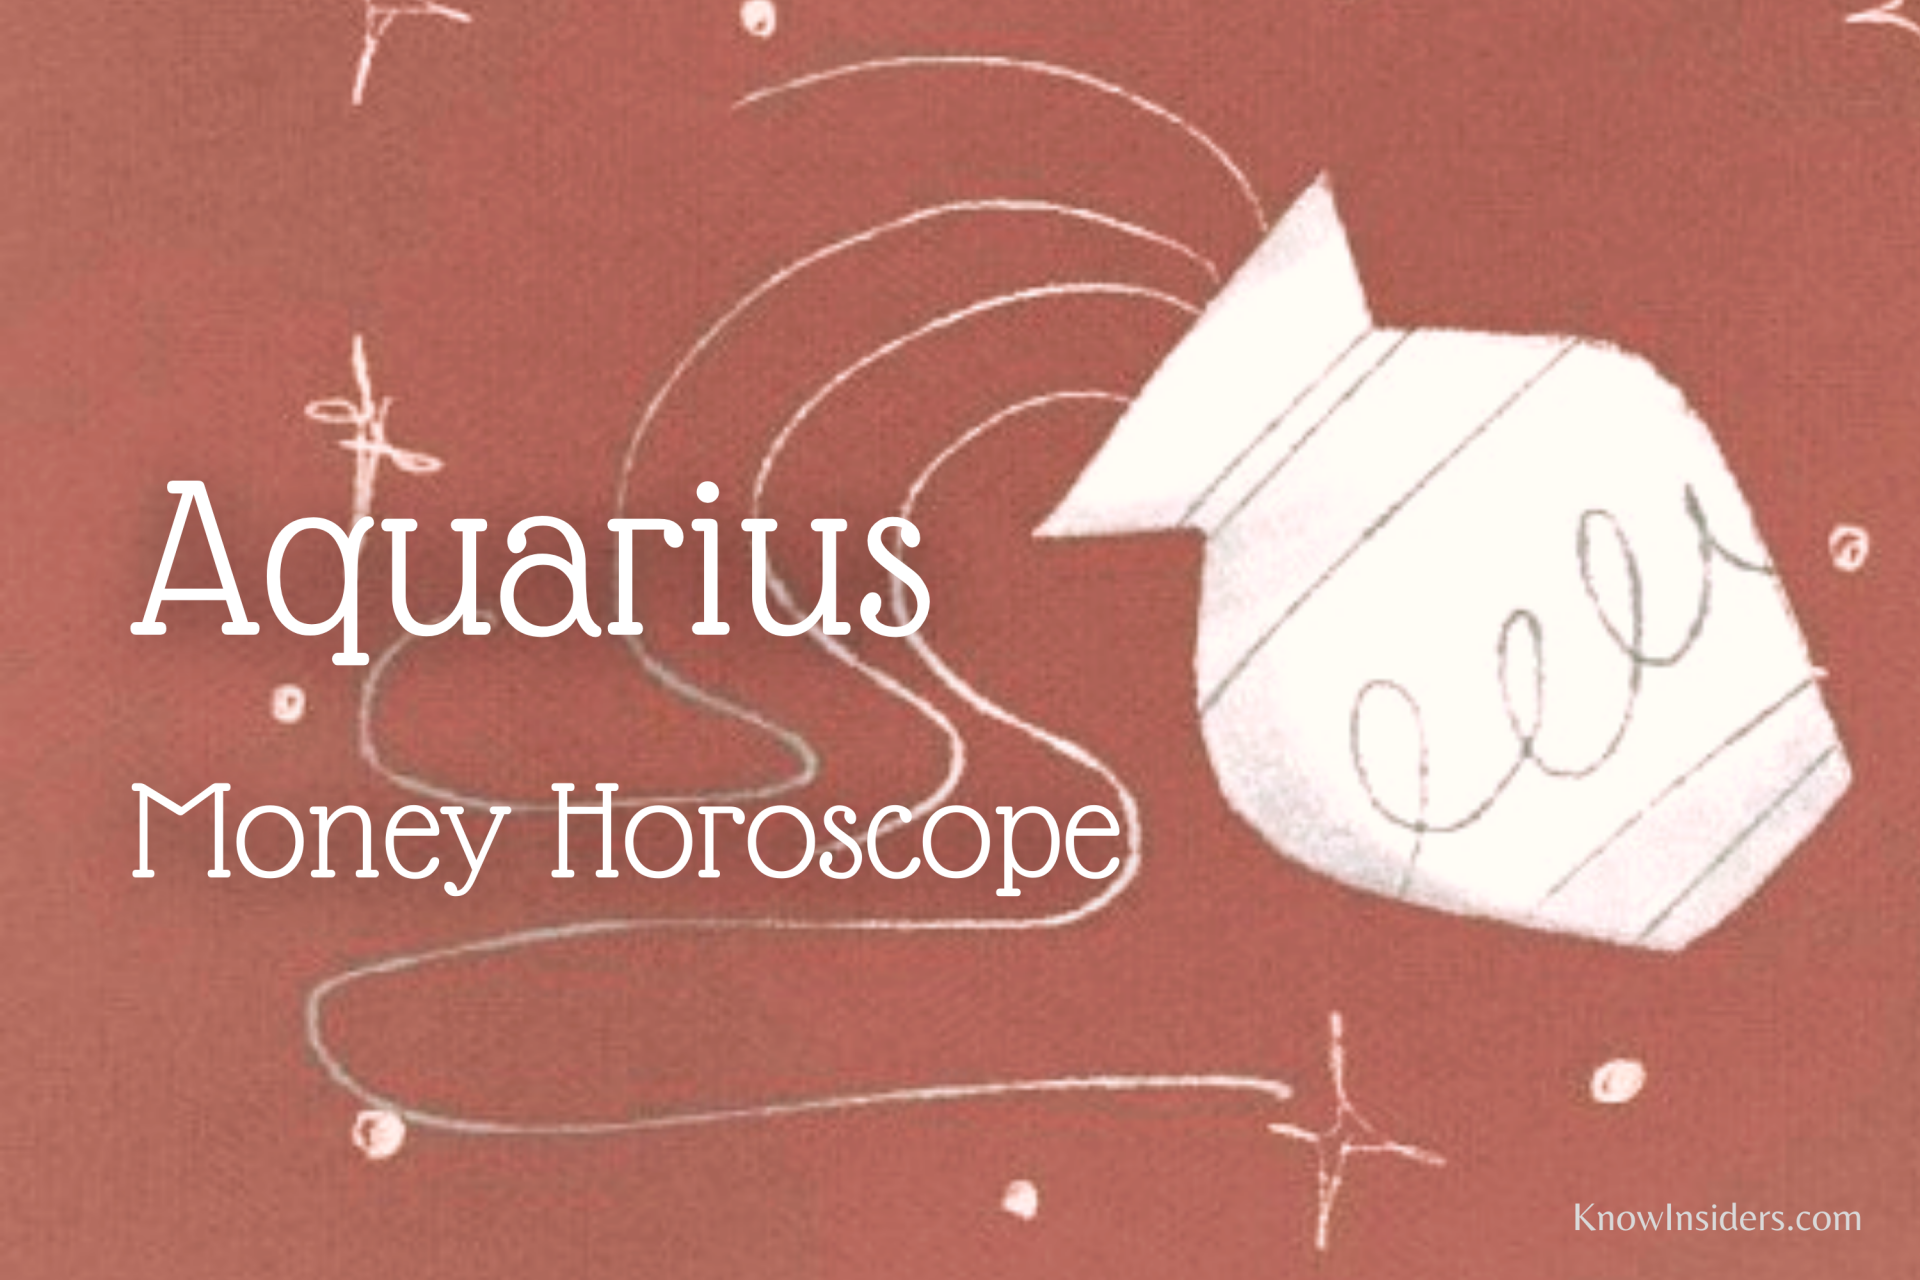 AQUARIUS Horoscope: Astrological Predictions for Money and Finance